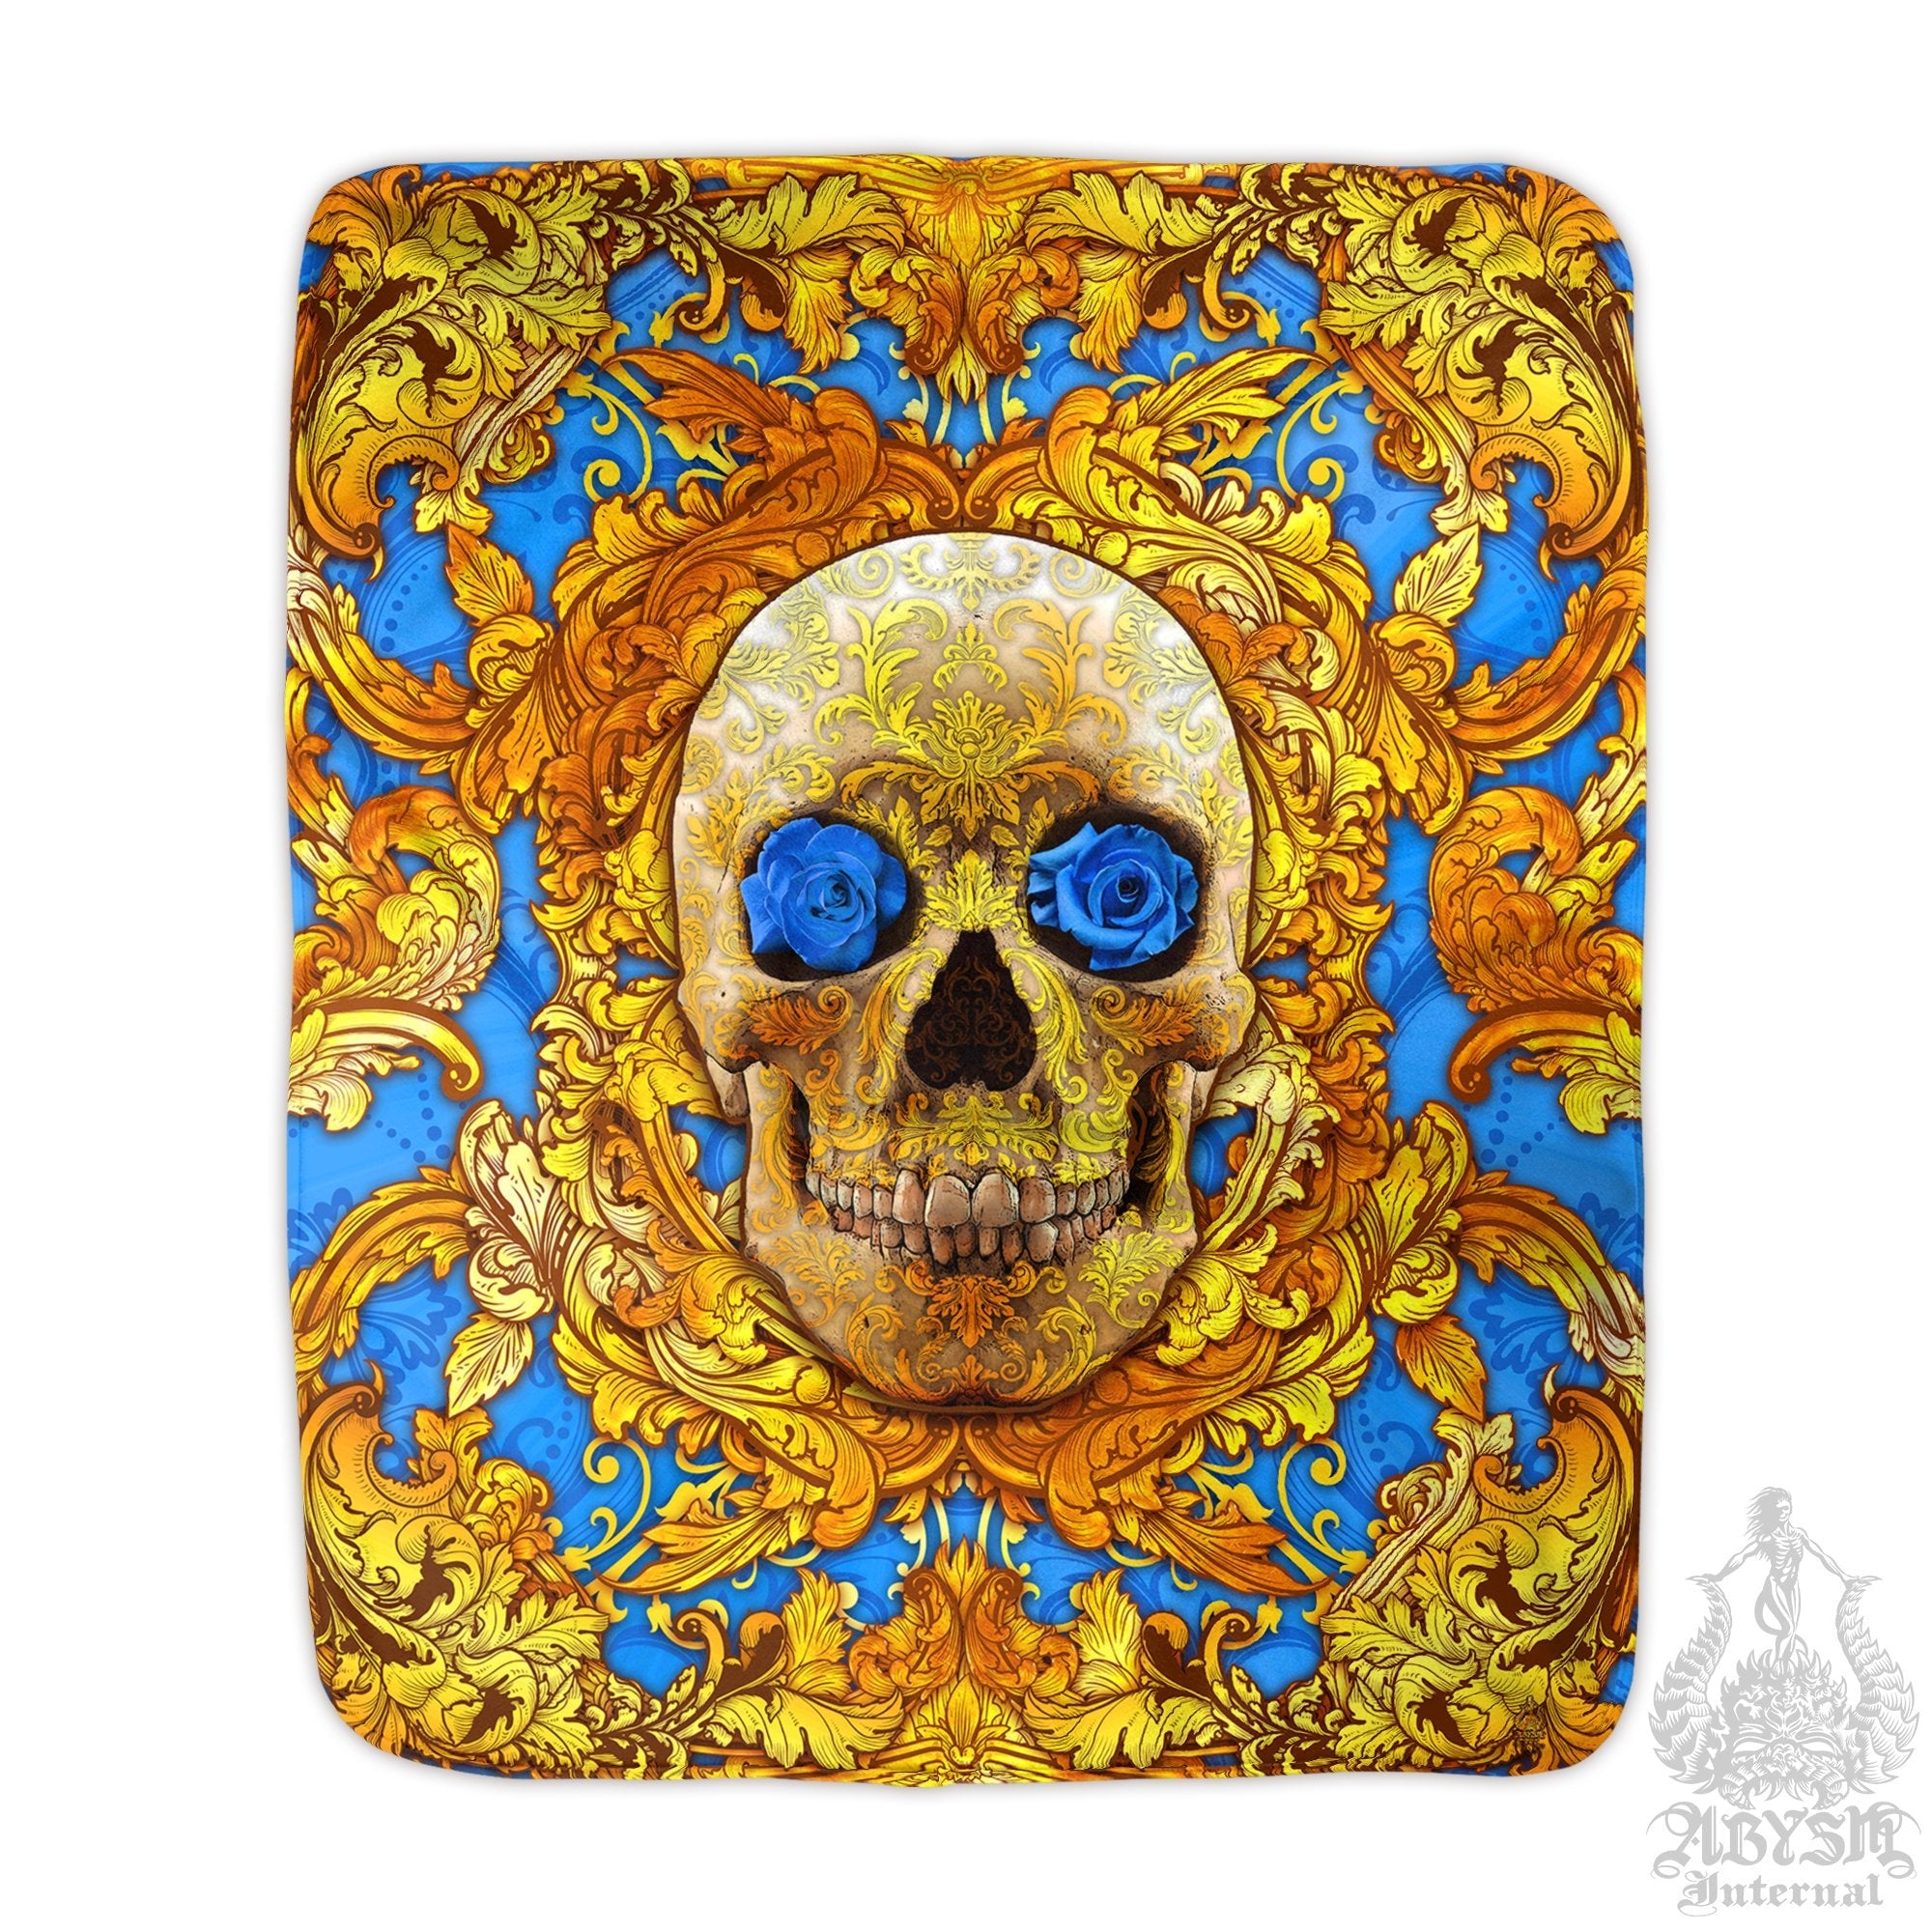 Skull Throw Fleece Blanket, Vintage Art, Baroque and Victorian Decor, Eclectic and Funky Gift - Cyan & Gold - Abysm Internal